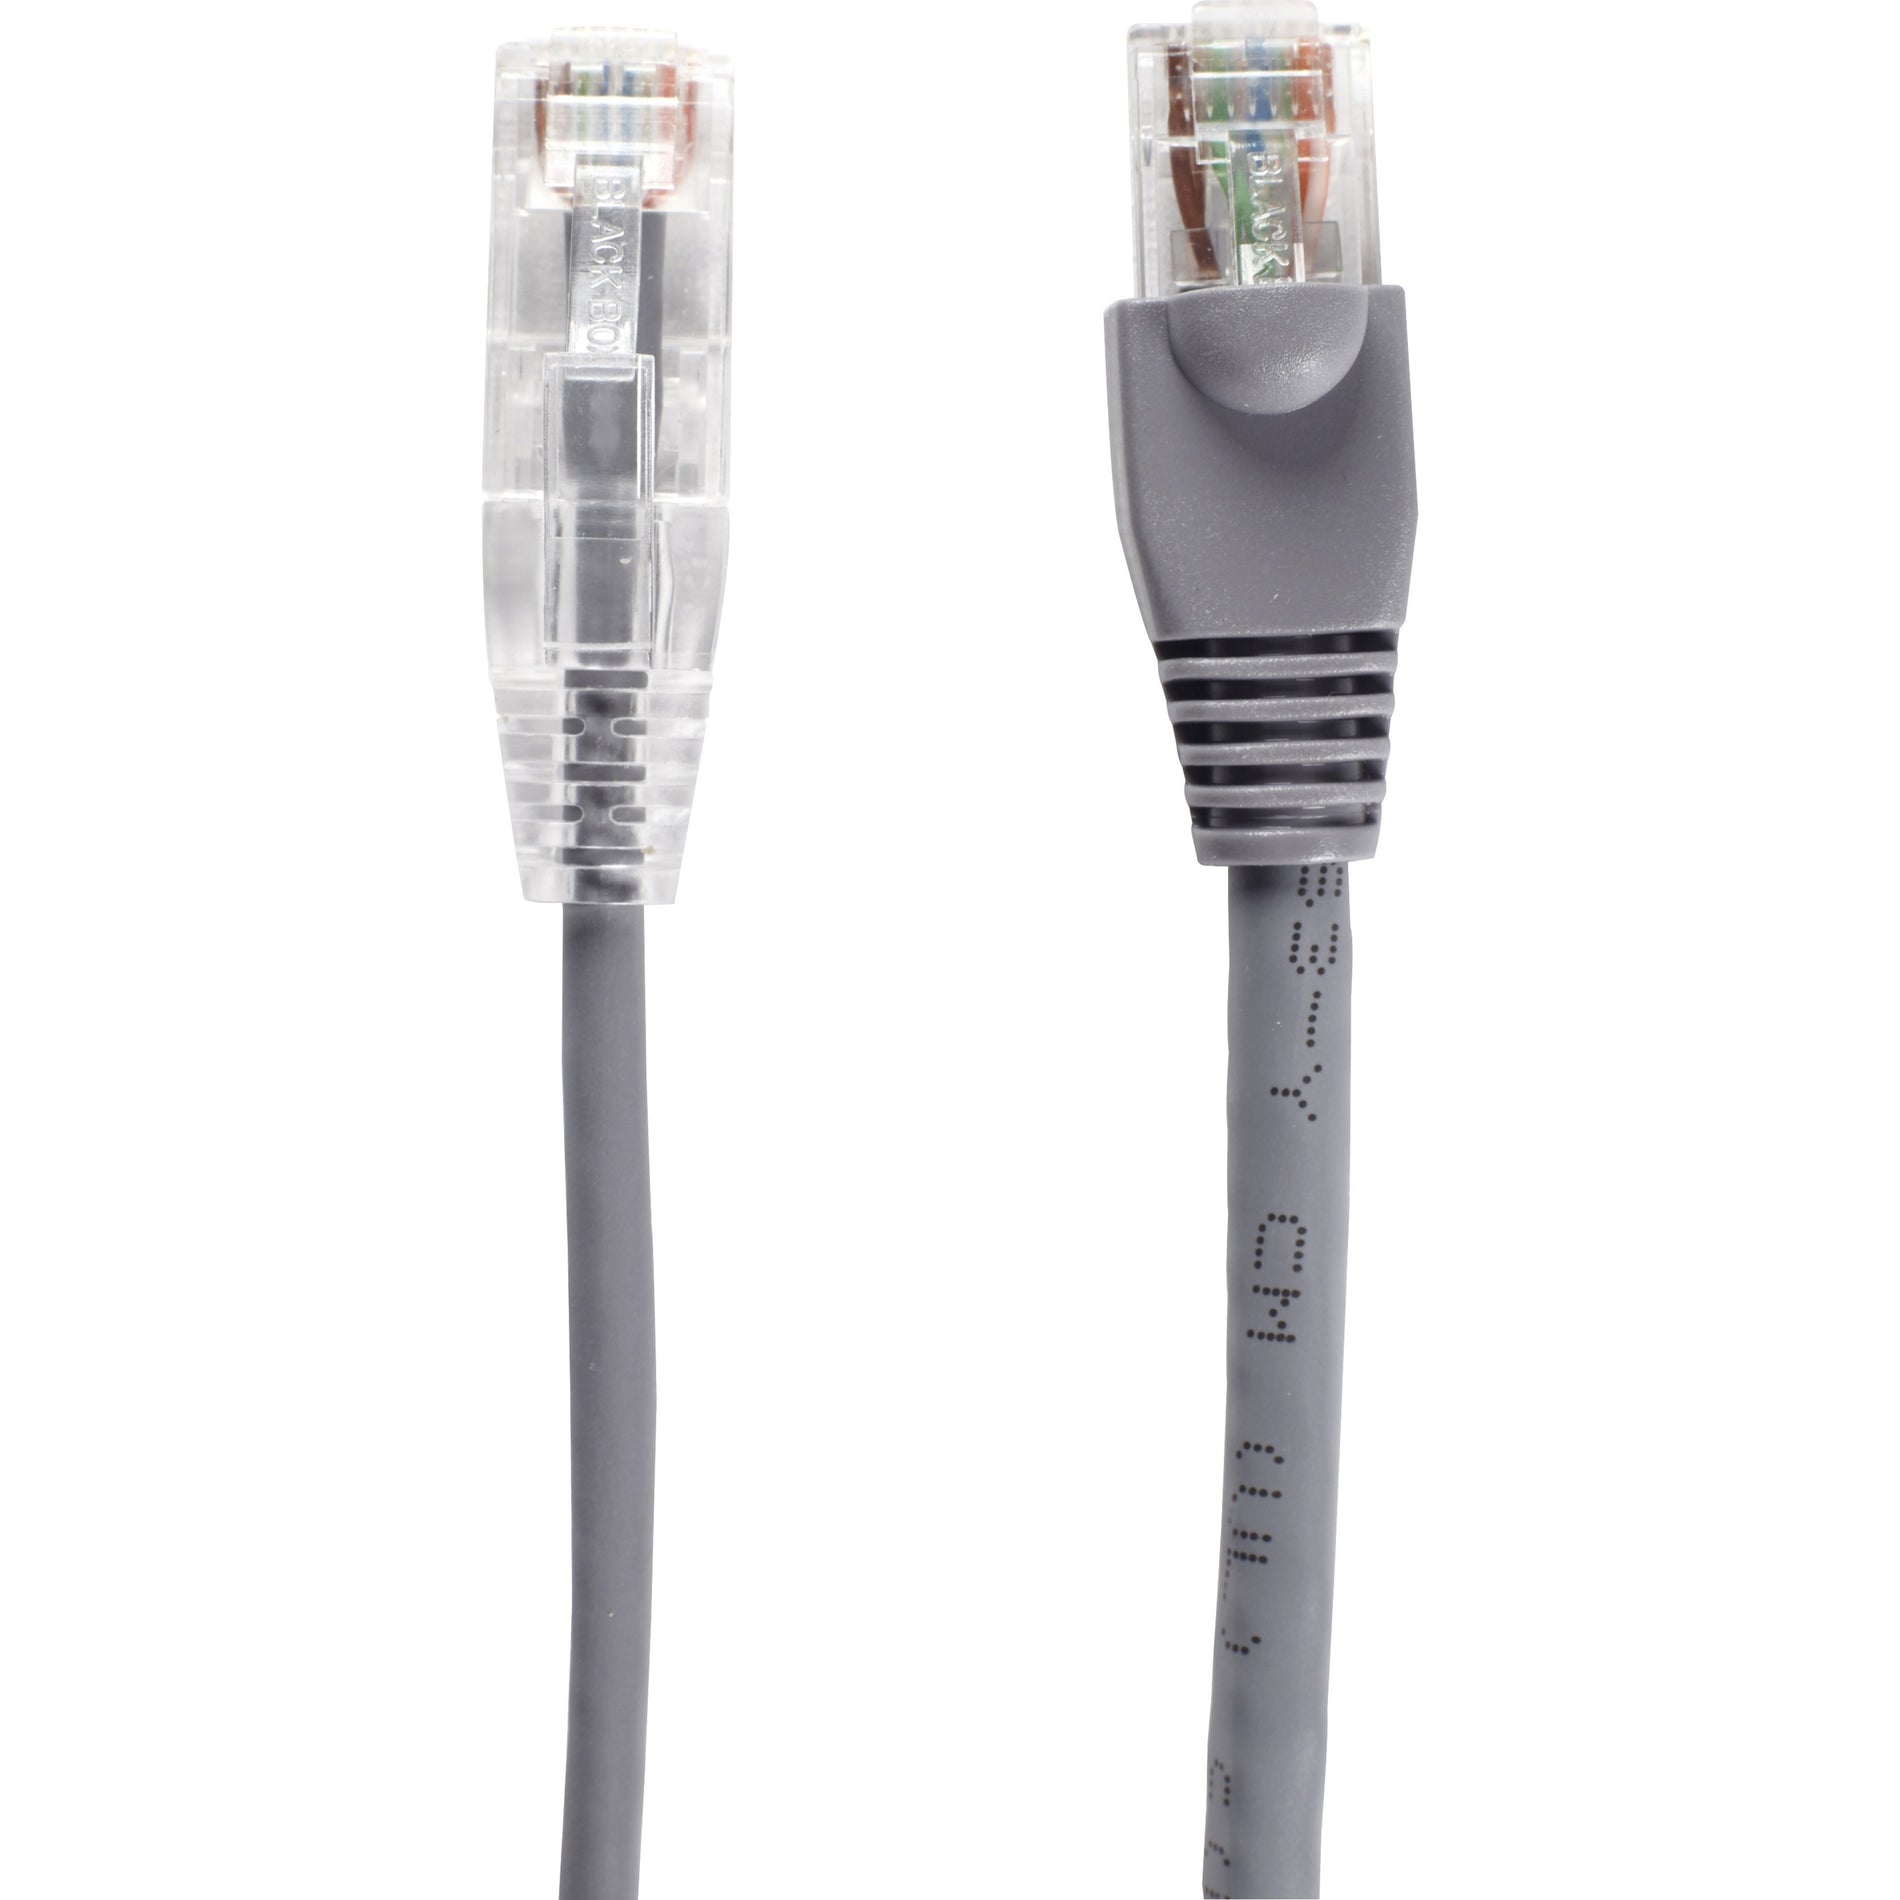 Black Box C6PC28-GY-20 Slim-Net Cat.6 UTP Patch Network Cable, 20 ft, Gold Plated Connectors, Snagless Boot